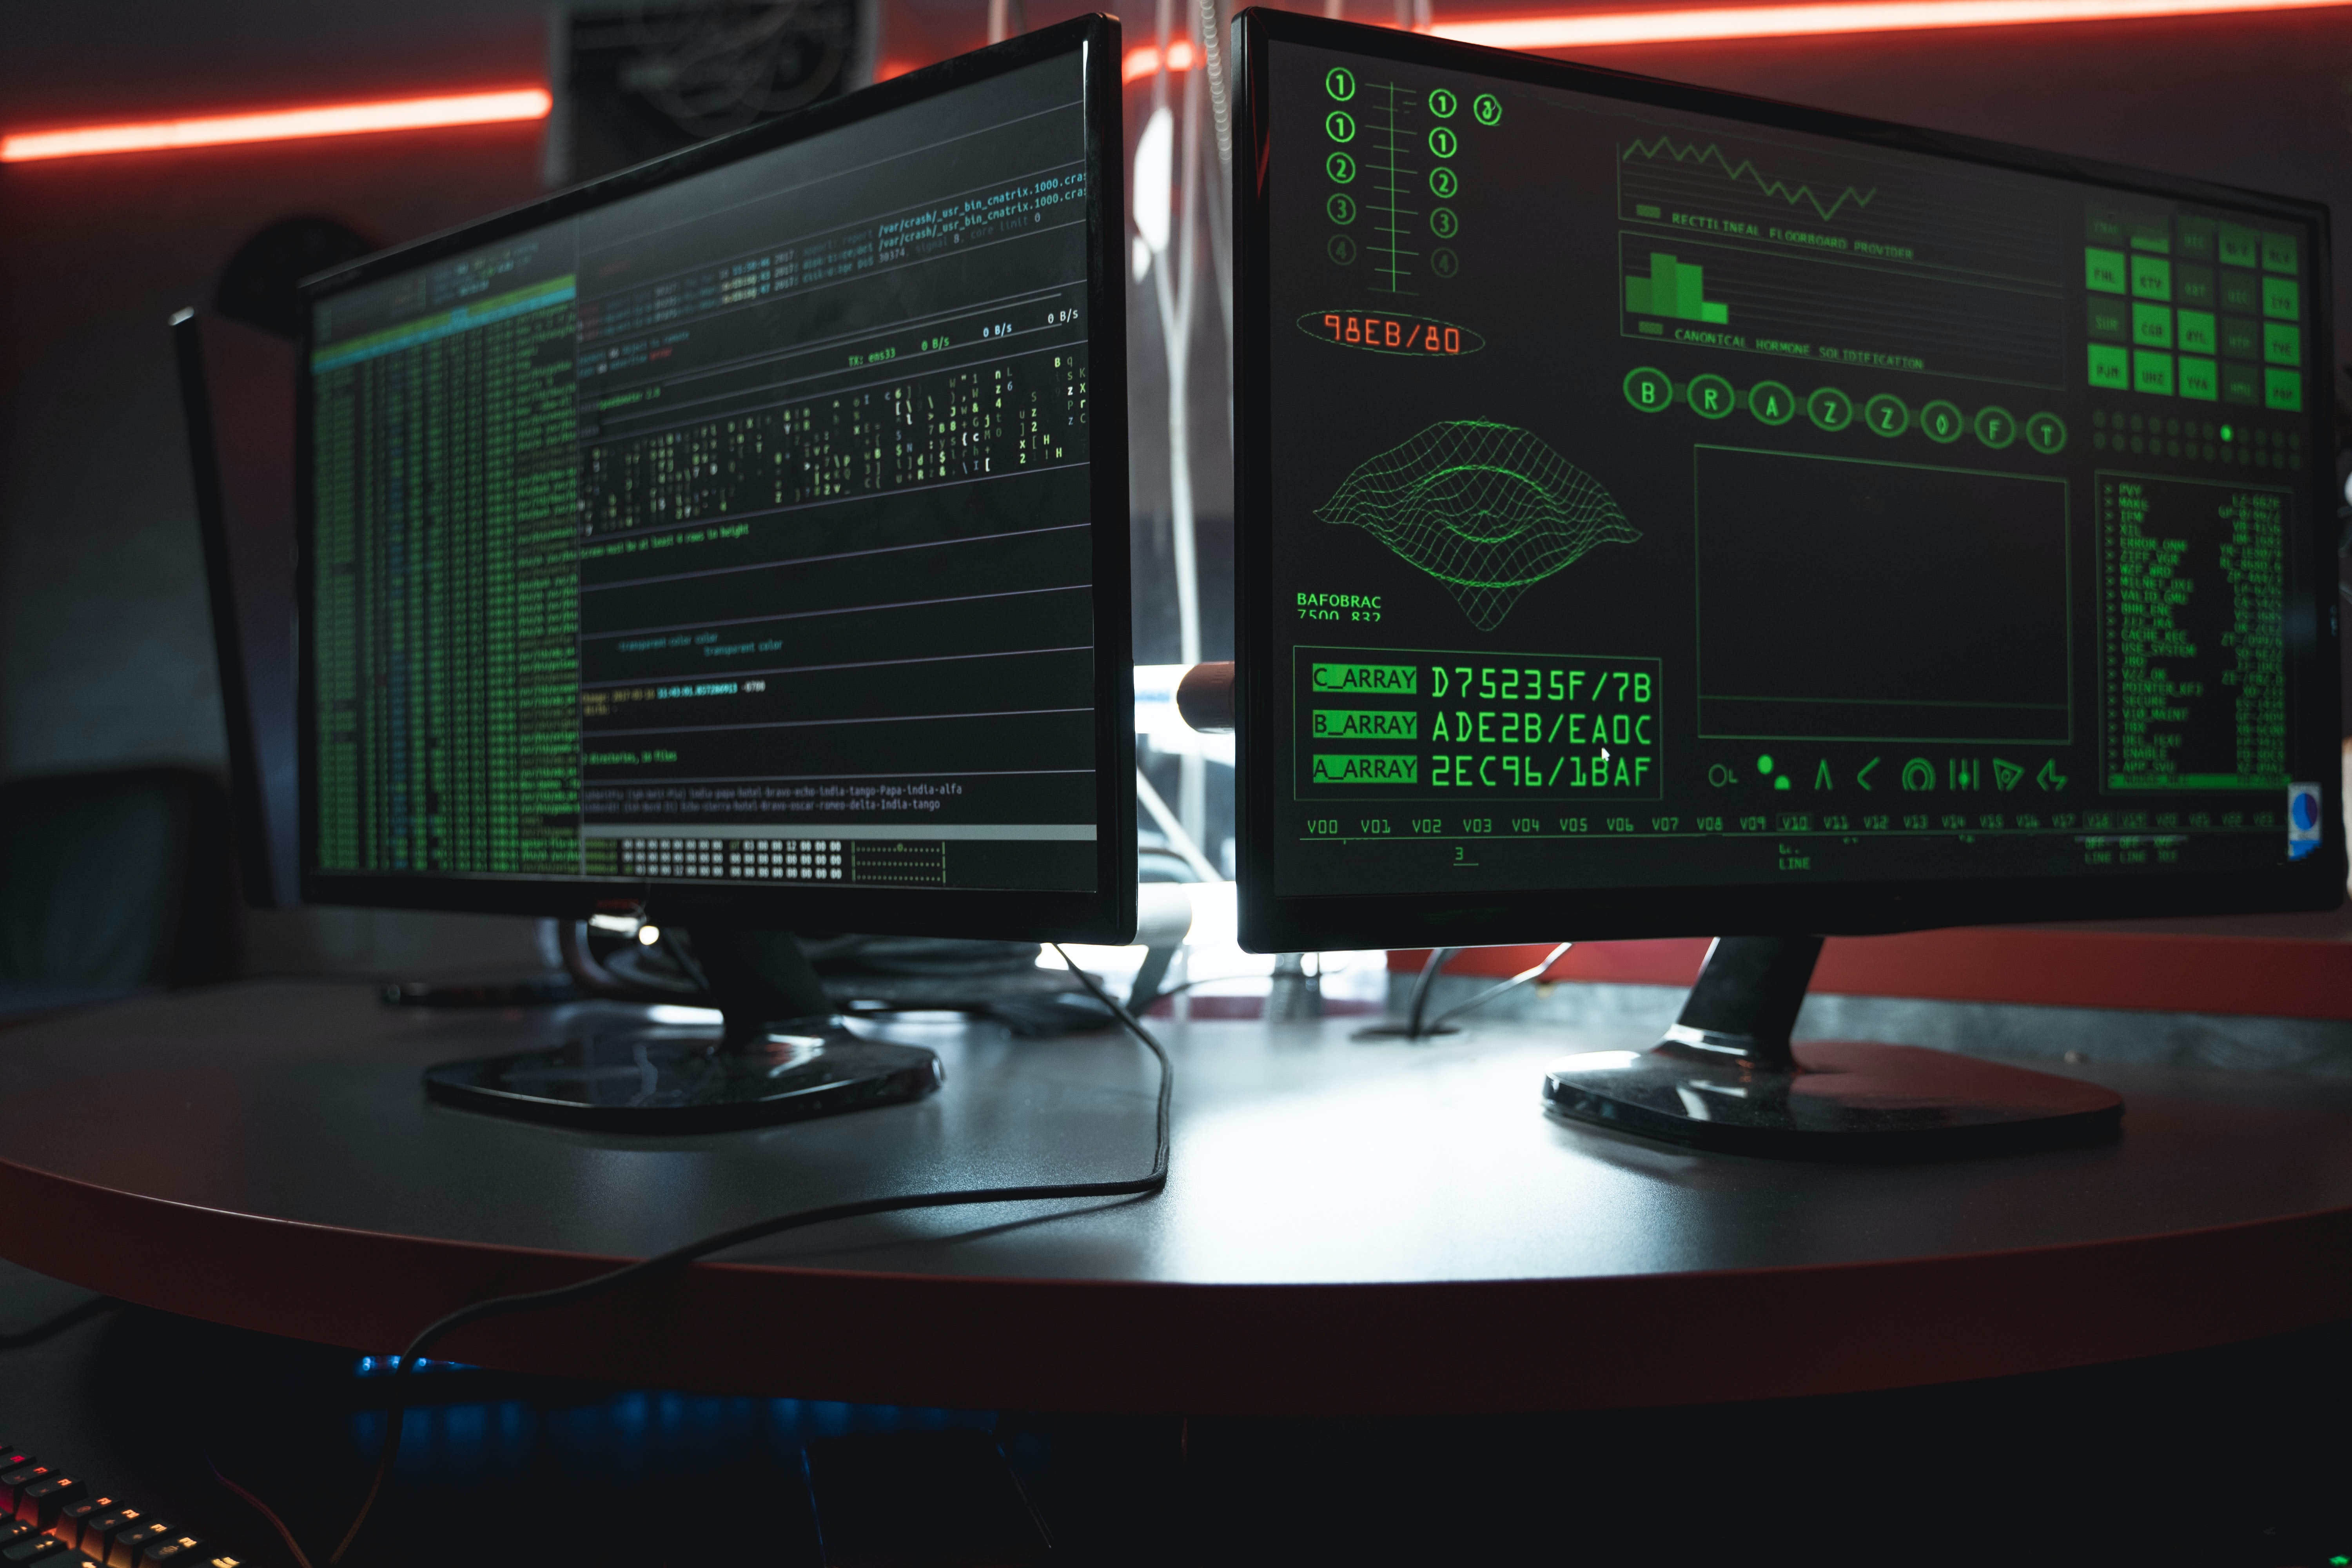 Dark monitors with green type marching across; quintessential iconography for cybersecurity